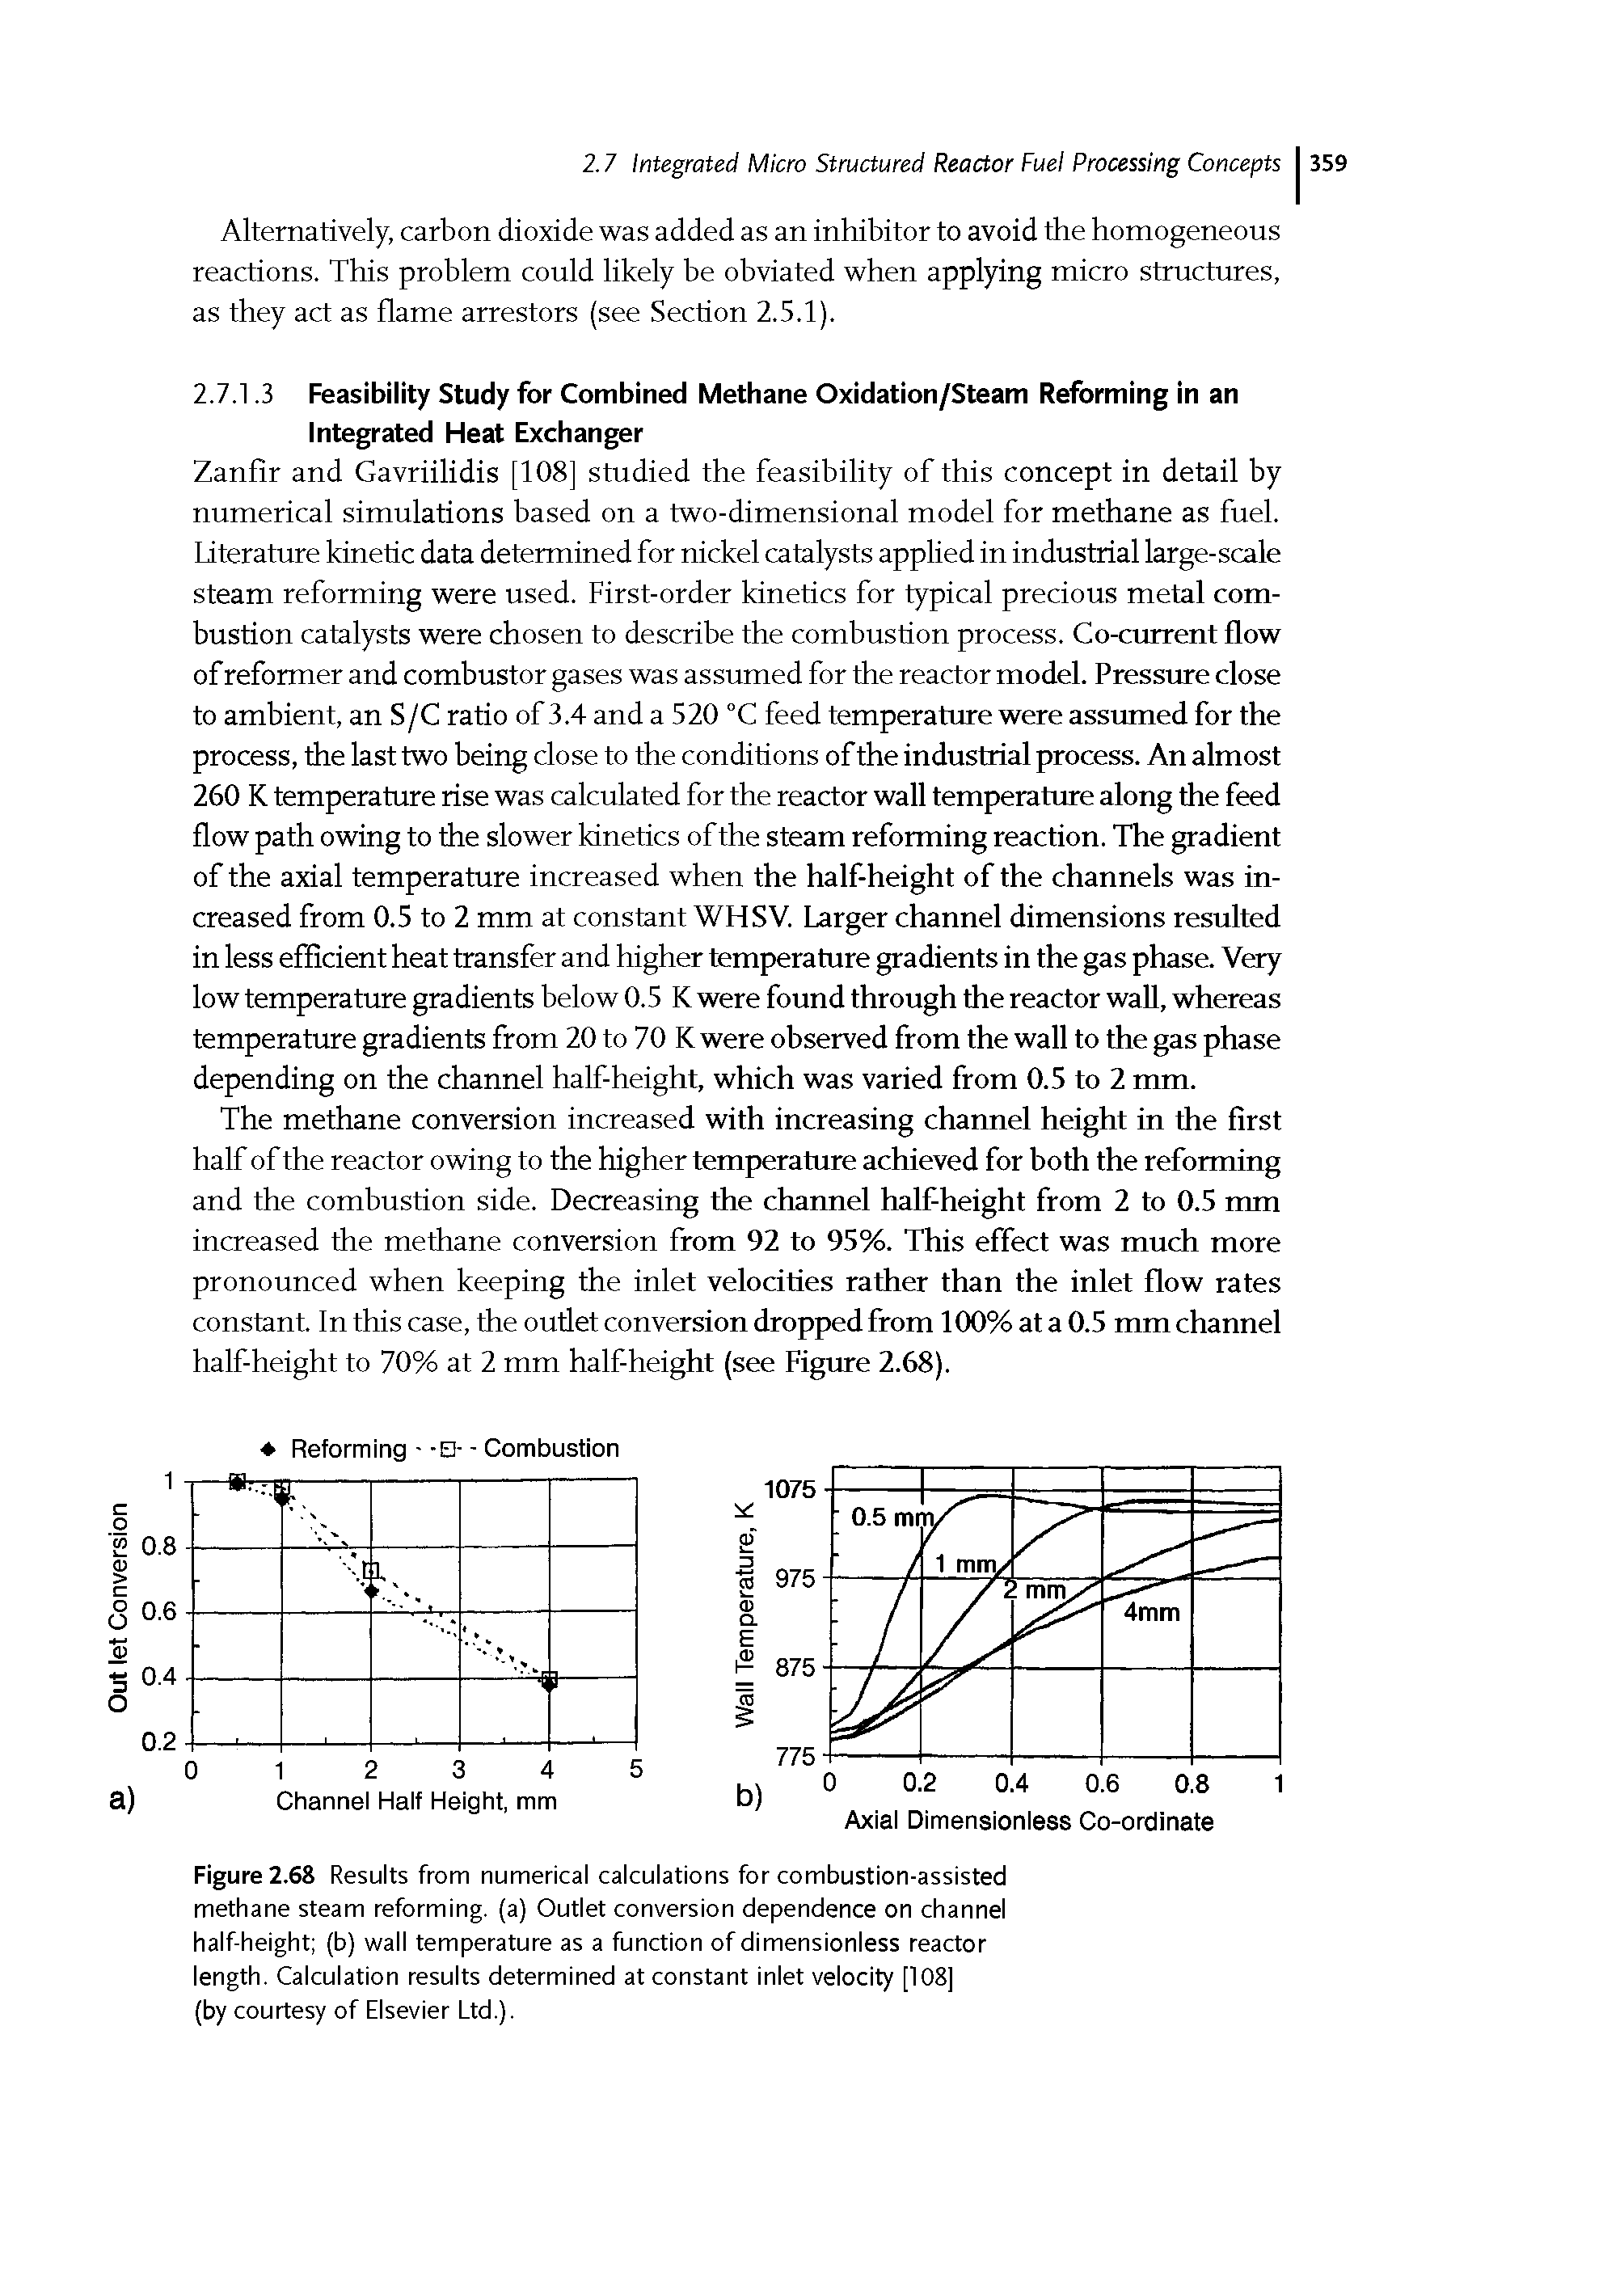 Figure 2.68 Results from numerical calculations for combustion-assisted methane steam reforming, (a) Outlet conversion dependence on channel half-height (b) wall temperature as a function of dimensionless reactor length. Calculation results determined at constant inlet velocity [108]...